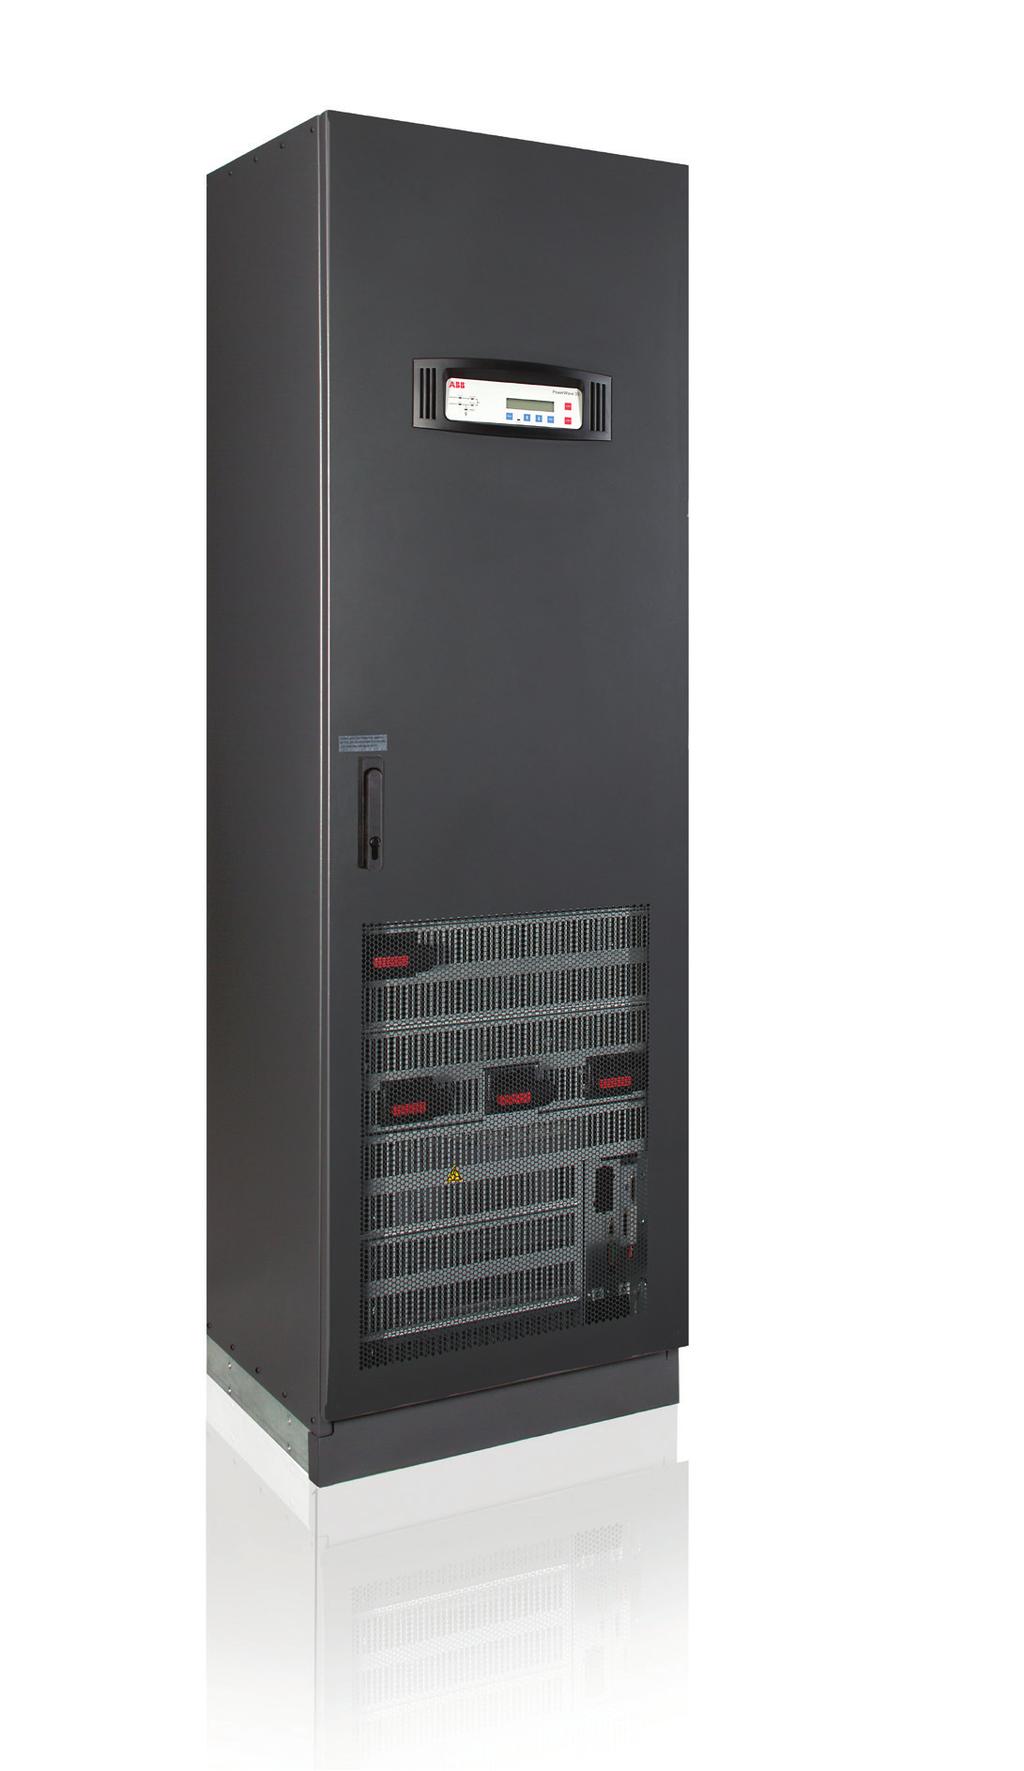 Innovative technology delivering unmatched power performance ABB has always set global standards in uninterruptible power supply (UPS) solutions.